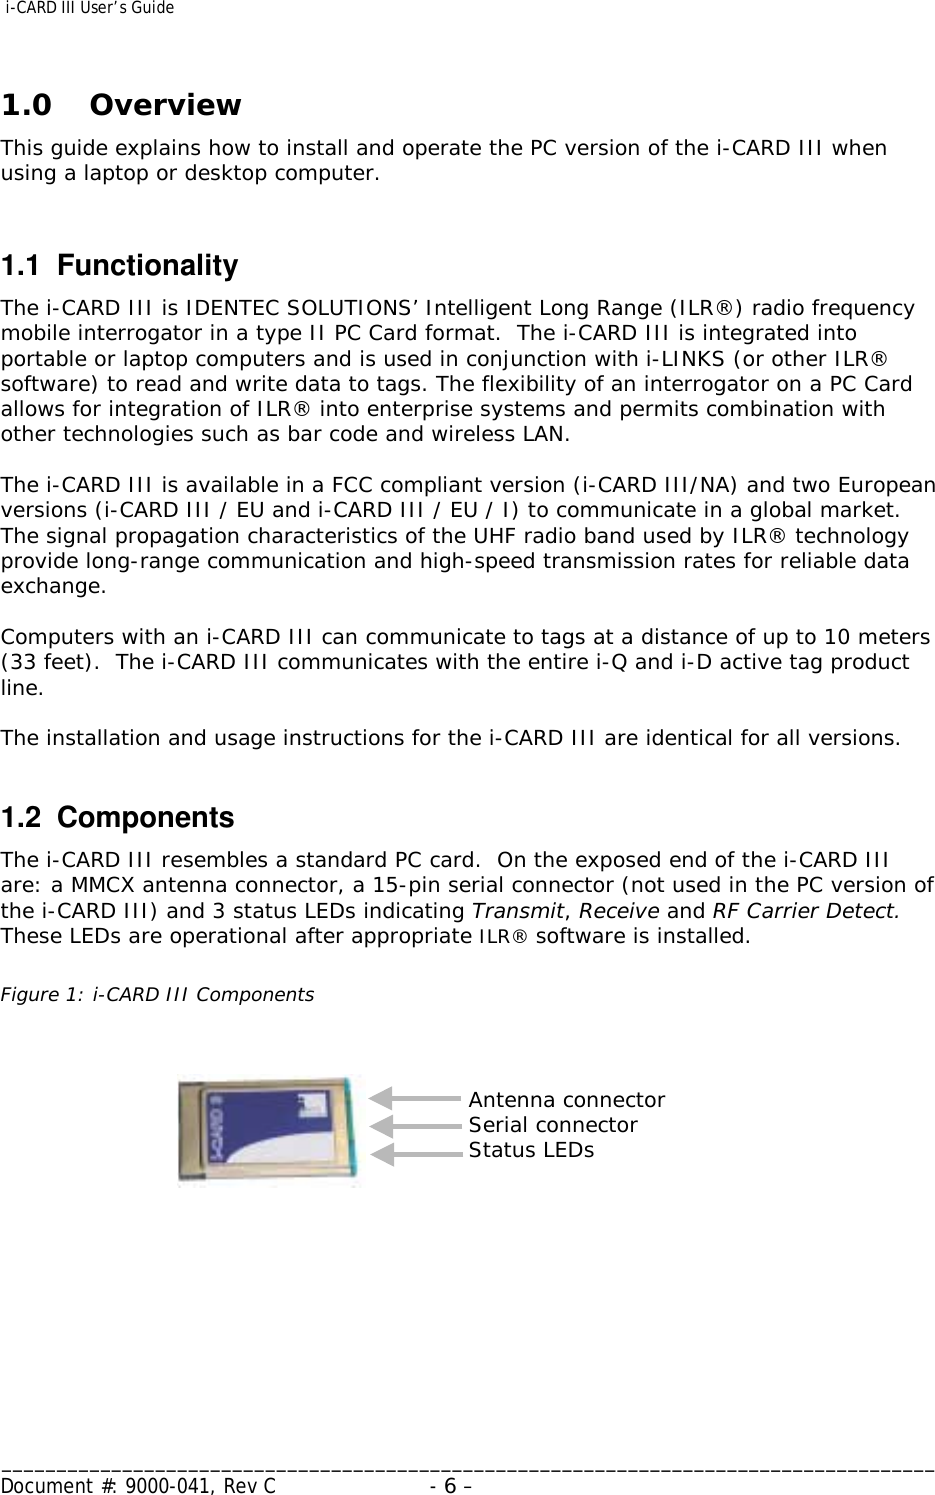  i-CARD III User’s Guide   _____________________________________________________________________________________ Document #: 9000-041, Rev C  - 6 –   1.0 Overview This guide explains how to install and operate the PC version of the i-CARD III when using a laptop or desktop computer.   1.1 Functionality The i-CARD III is IDENTEC SOLUTIONS’ Intelligent Long Range (ILR®) radio frequency mobile interrogator in a type II PC Card format.  The i-CARD III is integrated into portable or laptop computers and is used in conjunction with i-LINKS (or other ILR® software) to read and write data to tags. The flexibility of an interrogator on a PC Card allows for integration of ILR® into enterprise systems and permits combination with other technologies such as bar code and wireless LAN.    The i-CARD III is available in a FCC compliant version (i-CARD III/NA) and two European versions (i-CARD III / EU and i-CARD III / EU / I) to communicate in a global market.  The signal propagation characteristics of the UHF radio band used by ILR® technology provide long-range communication and high-speed transmission rates for reliable data exchange.   Computers with an i-CARD III can communicate to tags at a distance of up to 10 meters (33 feet).  The i-CARD III communicates with the entire i-Q and i-D active tag product line.  The installation and usage instructions for the i-CARD III are identical for all versions.   1.2 Components The i-CARD III resembles a standard PC card.  On the exposed end of the i-CARD III are: a MMCX antenna connector, a 15-pin serial connector (not used in the PC version of the i-CARD III) and 3 status LEDs indicating Transmit, Receive and RF Carrier Detect.  These LEDs are operational after appropriate ILR® software is installed.    Figure 1: i-CARD III Components          Antenna connector Serial connector Status LEDs